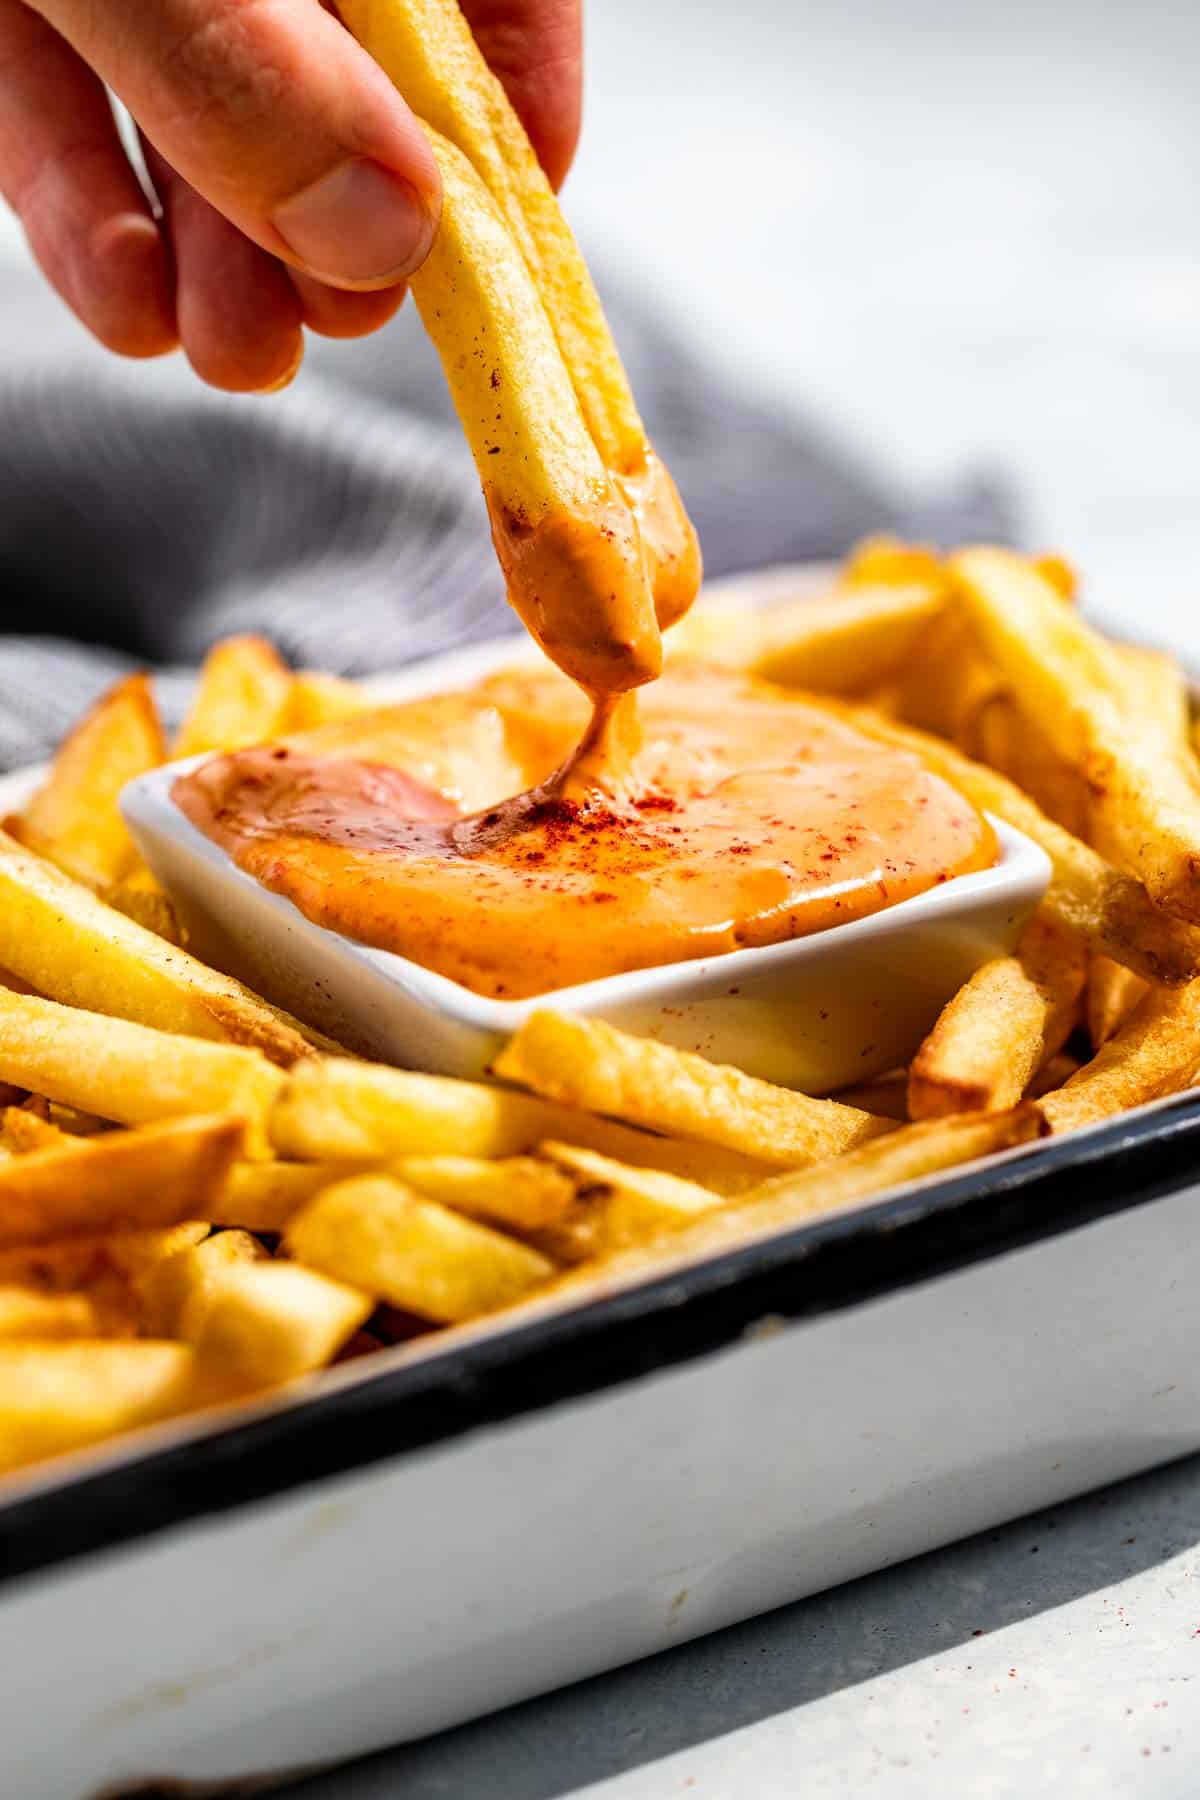 A hand dipping two French fries into a square dish of Chipotle Aioli.